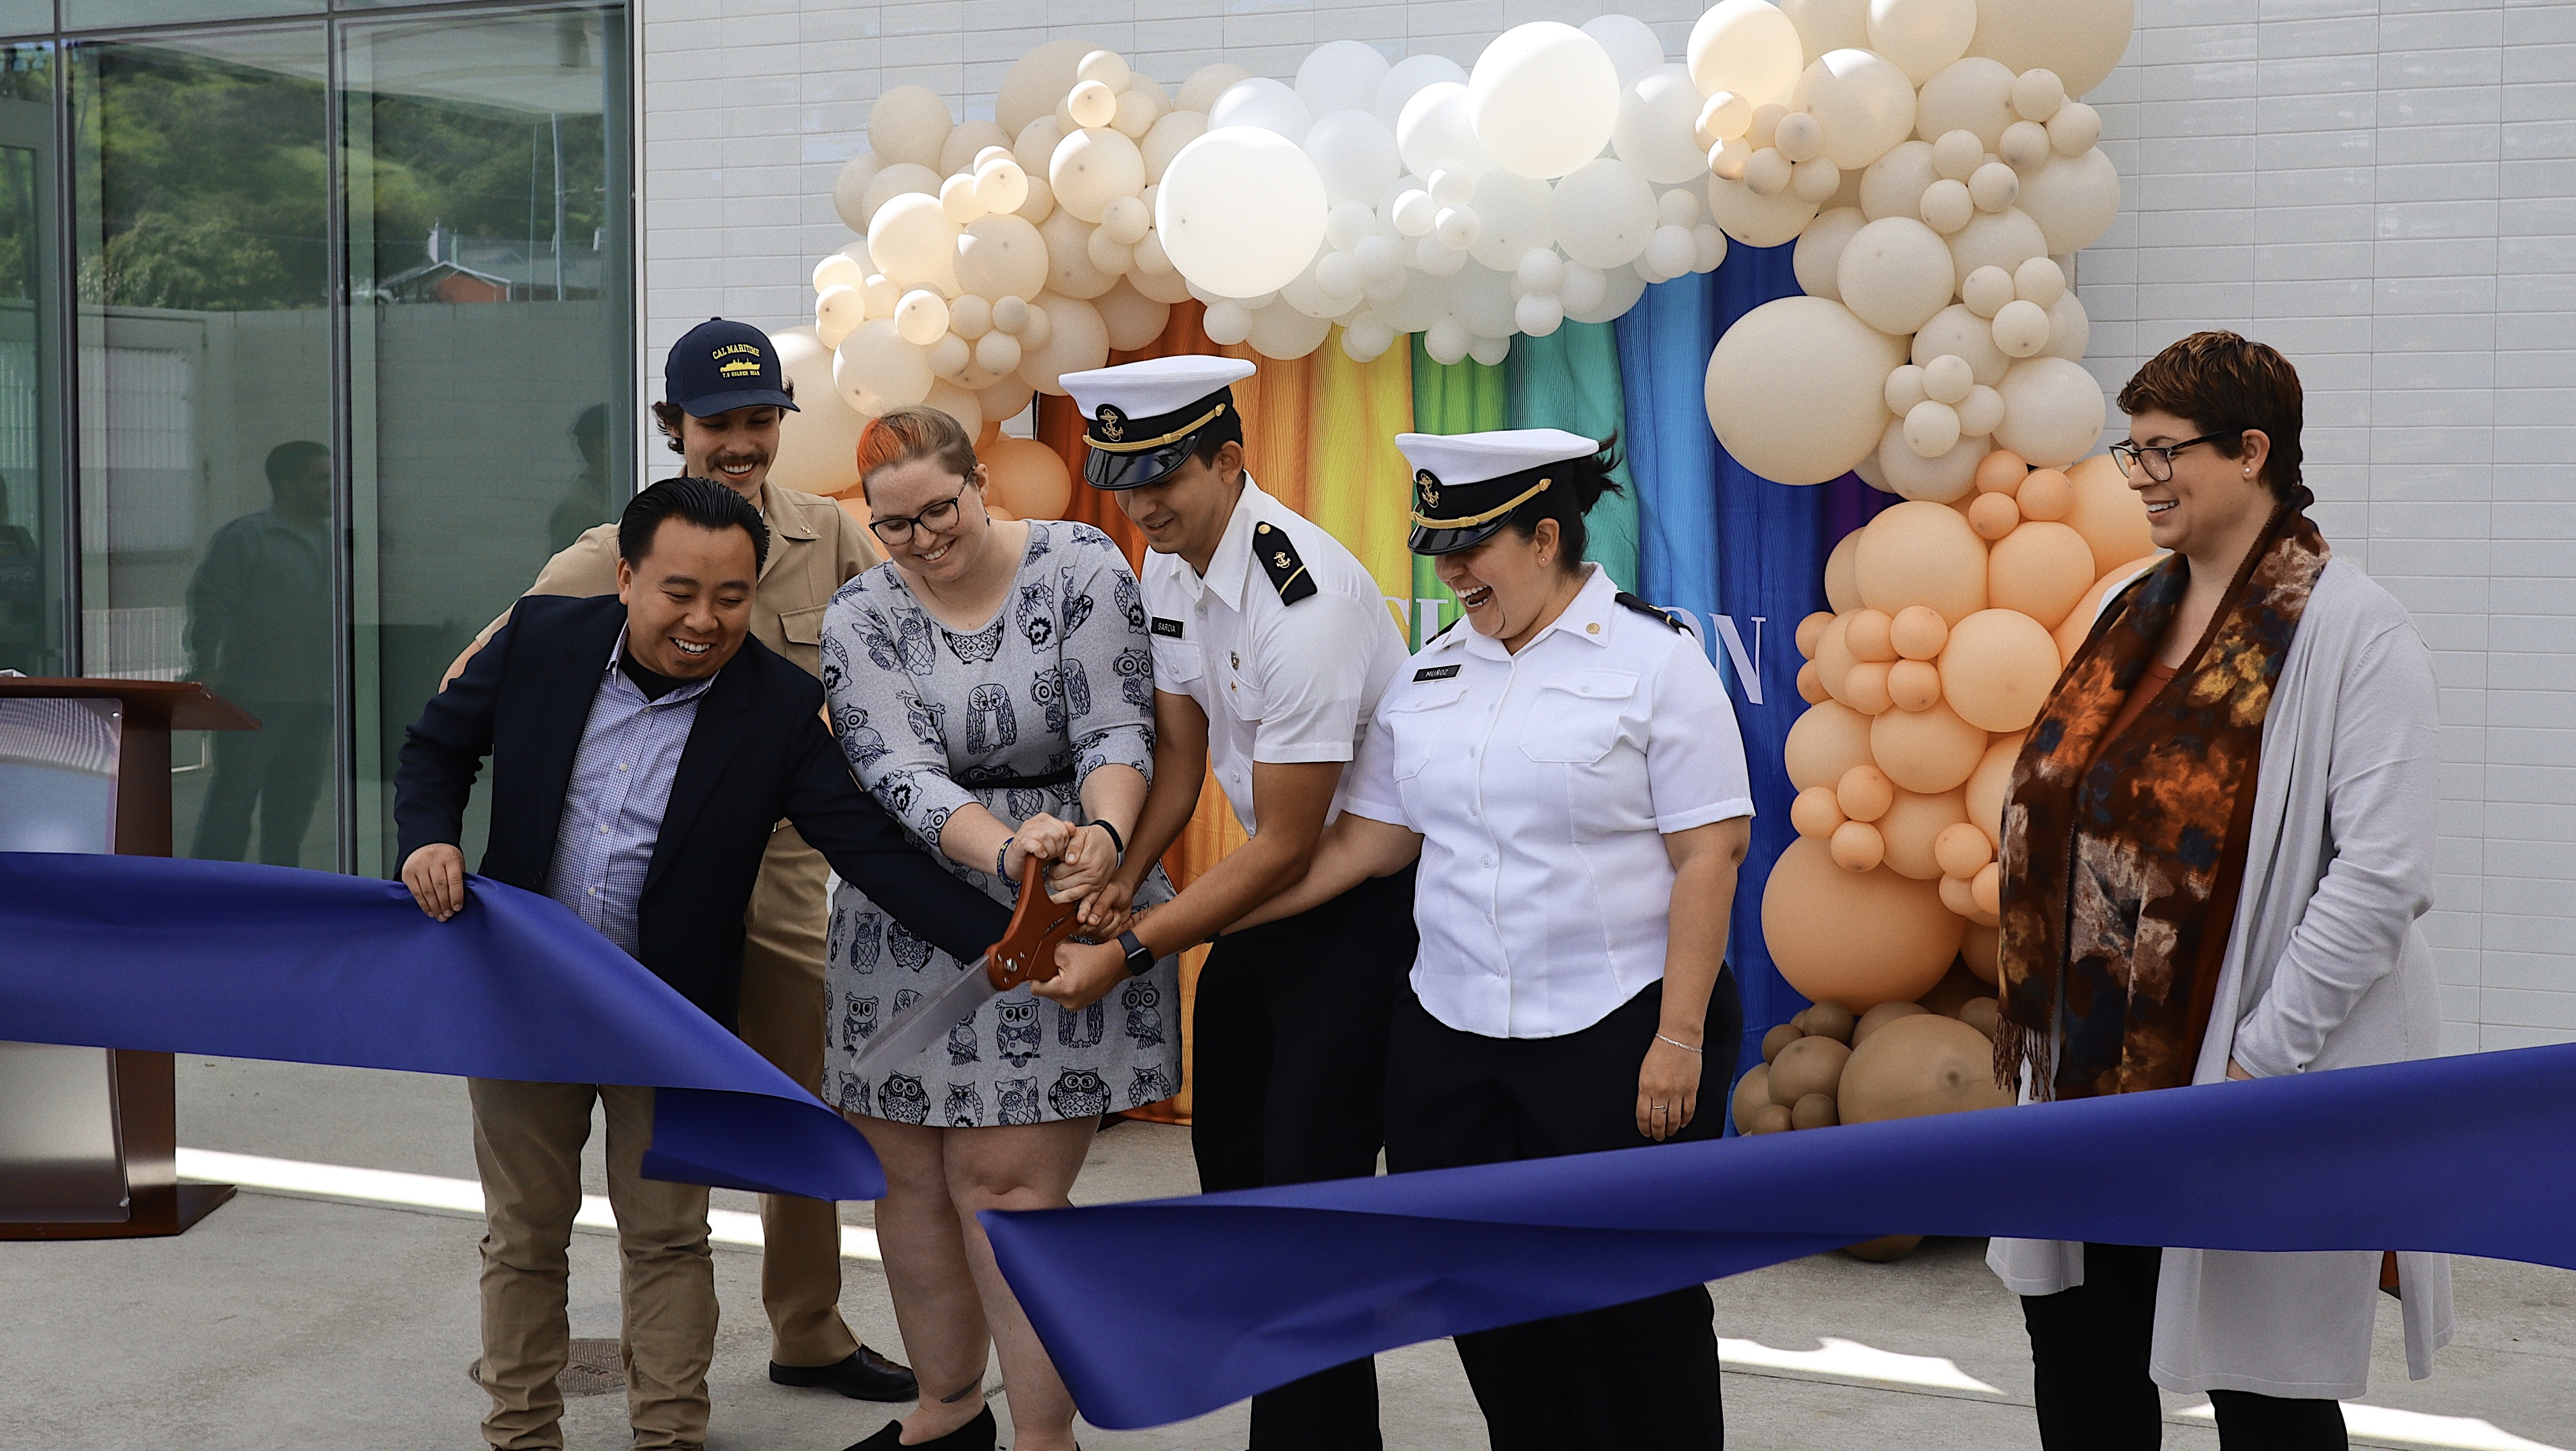 Cal Maritime celebrated the grand opening of its first-ever Inclusion Center this week with a ribbon cutting and reception on Tuesday, March 8.